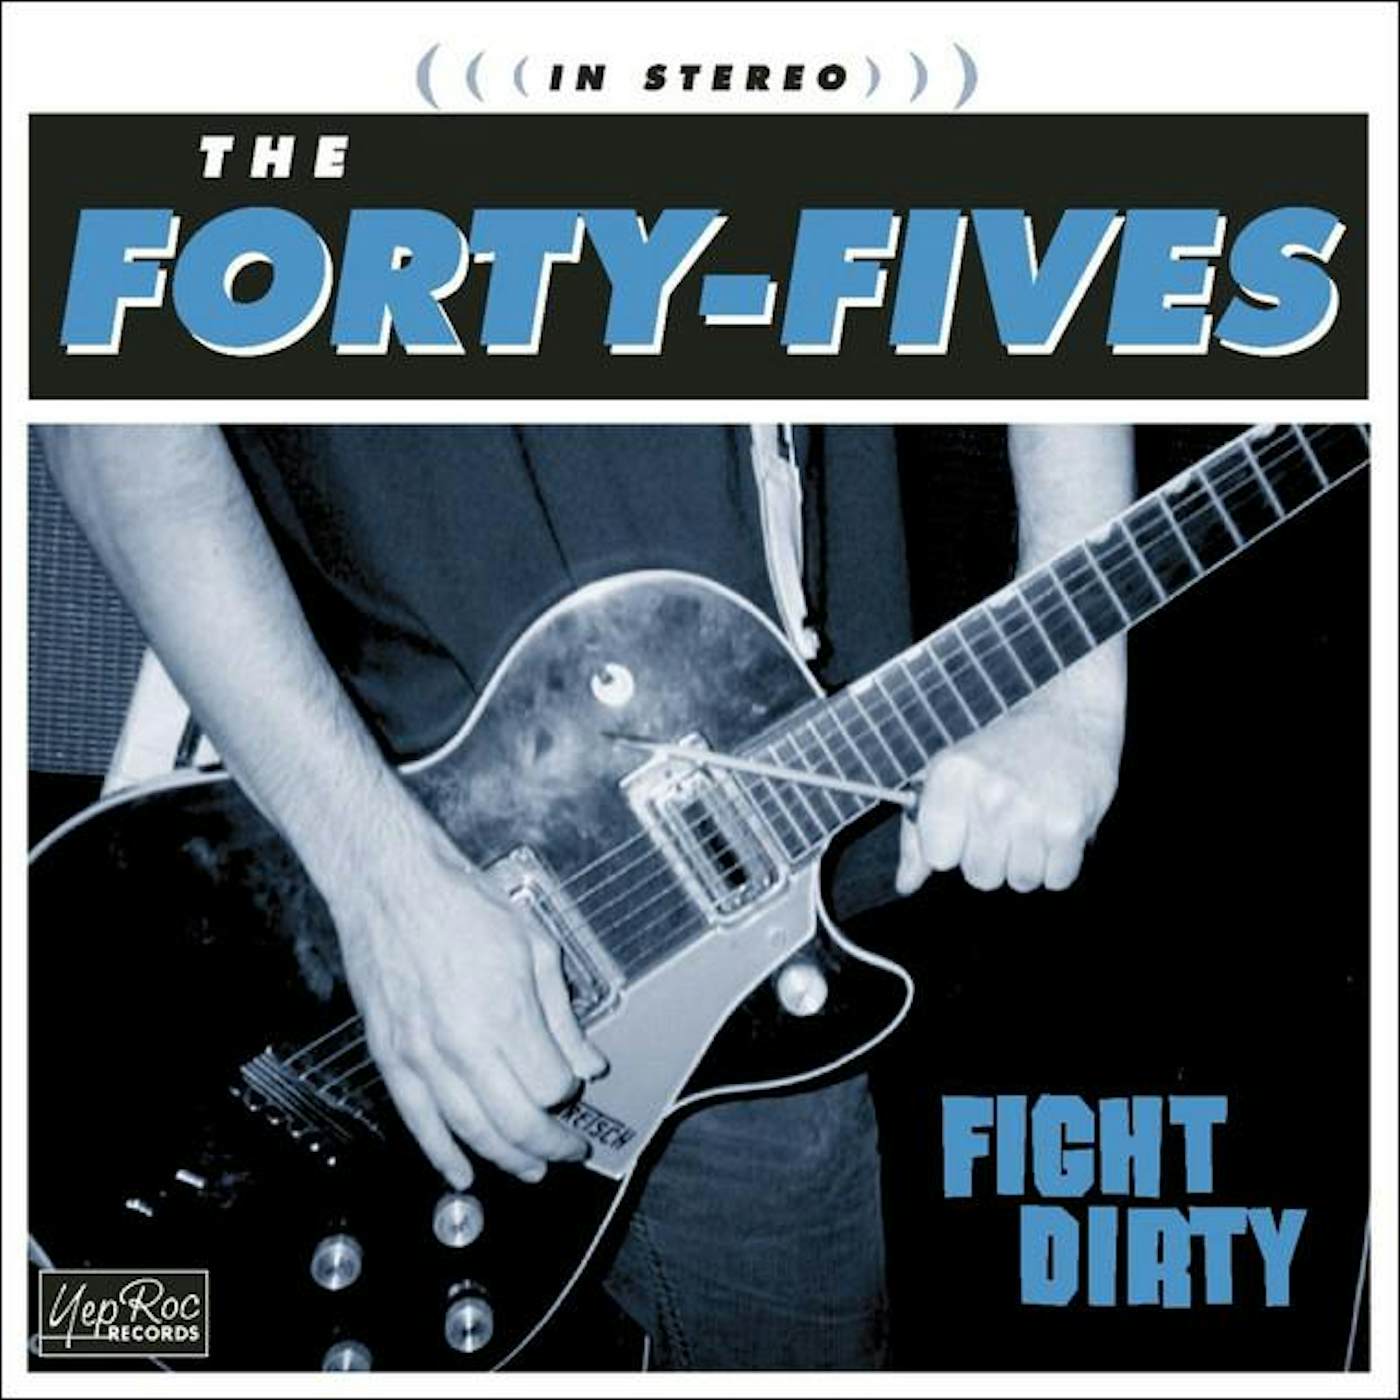 The Forty-Fives